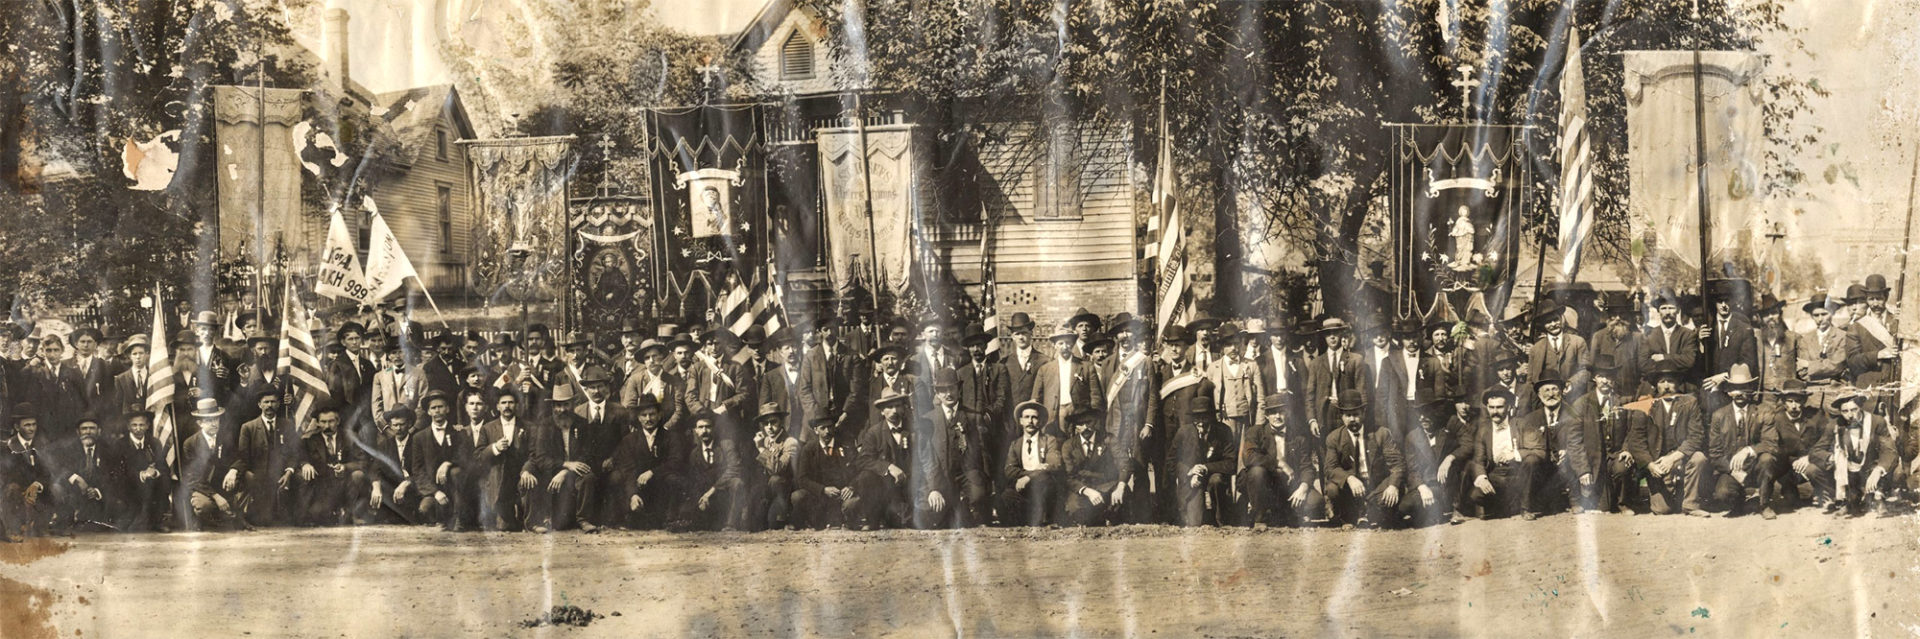 Large group of men in suits and hats posing for photo in front of flags